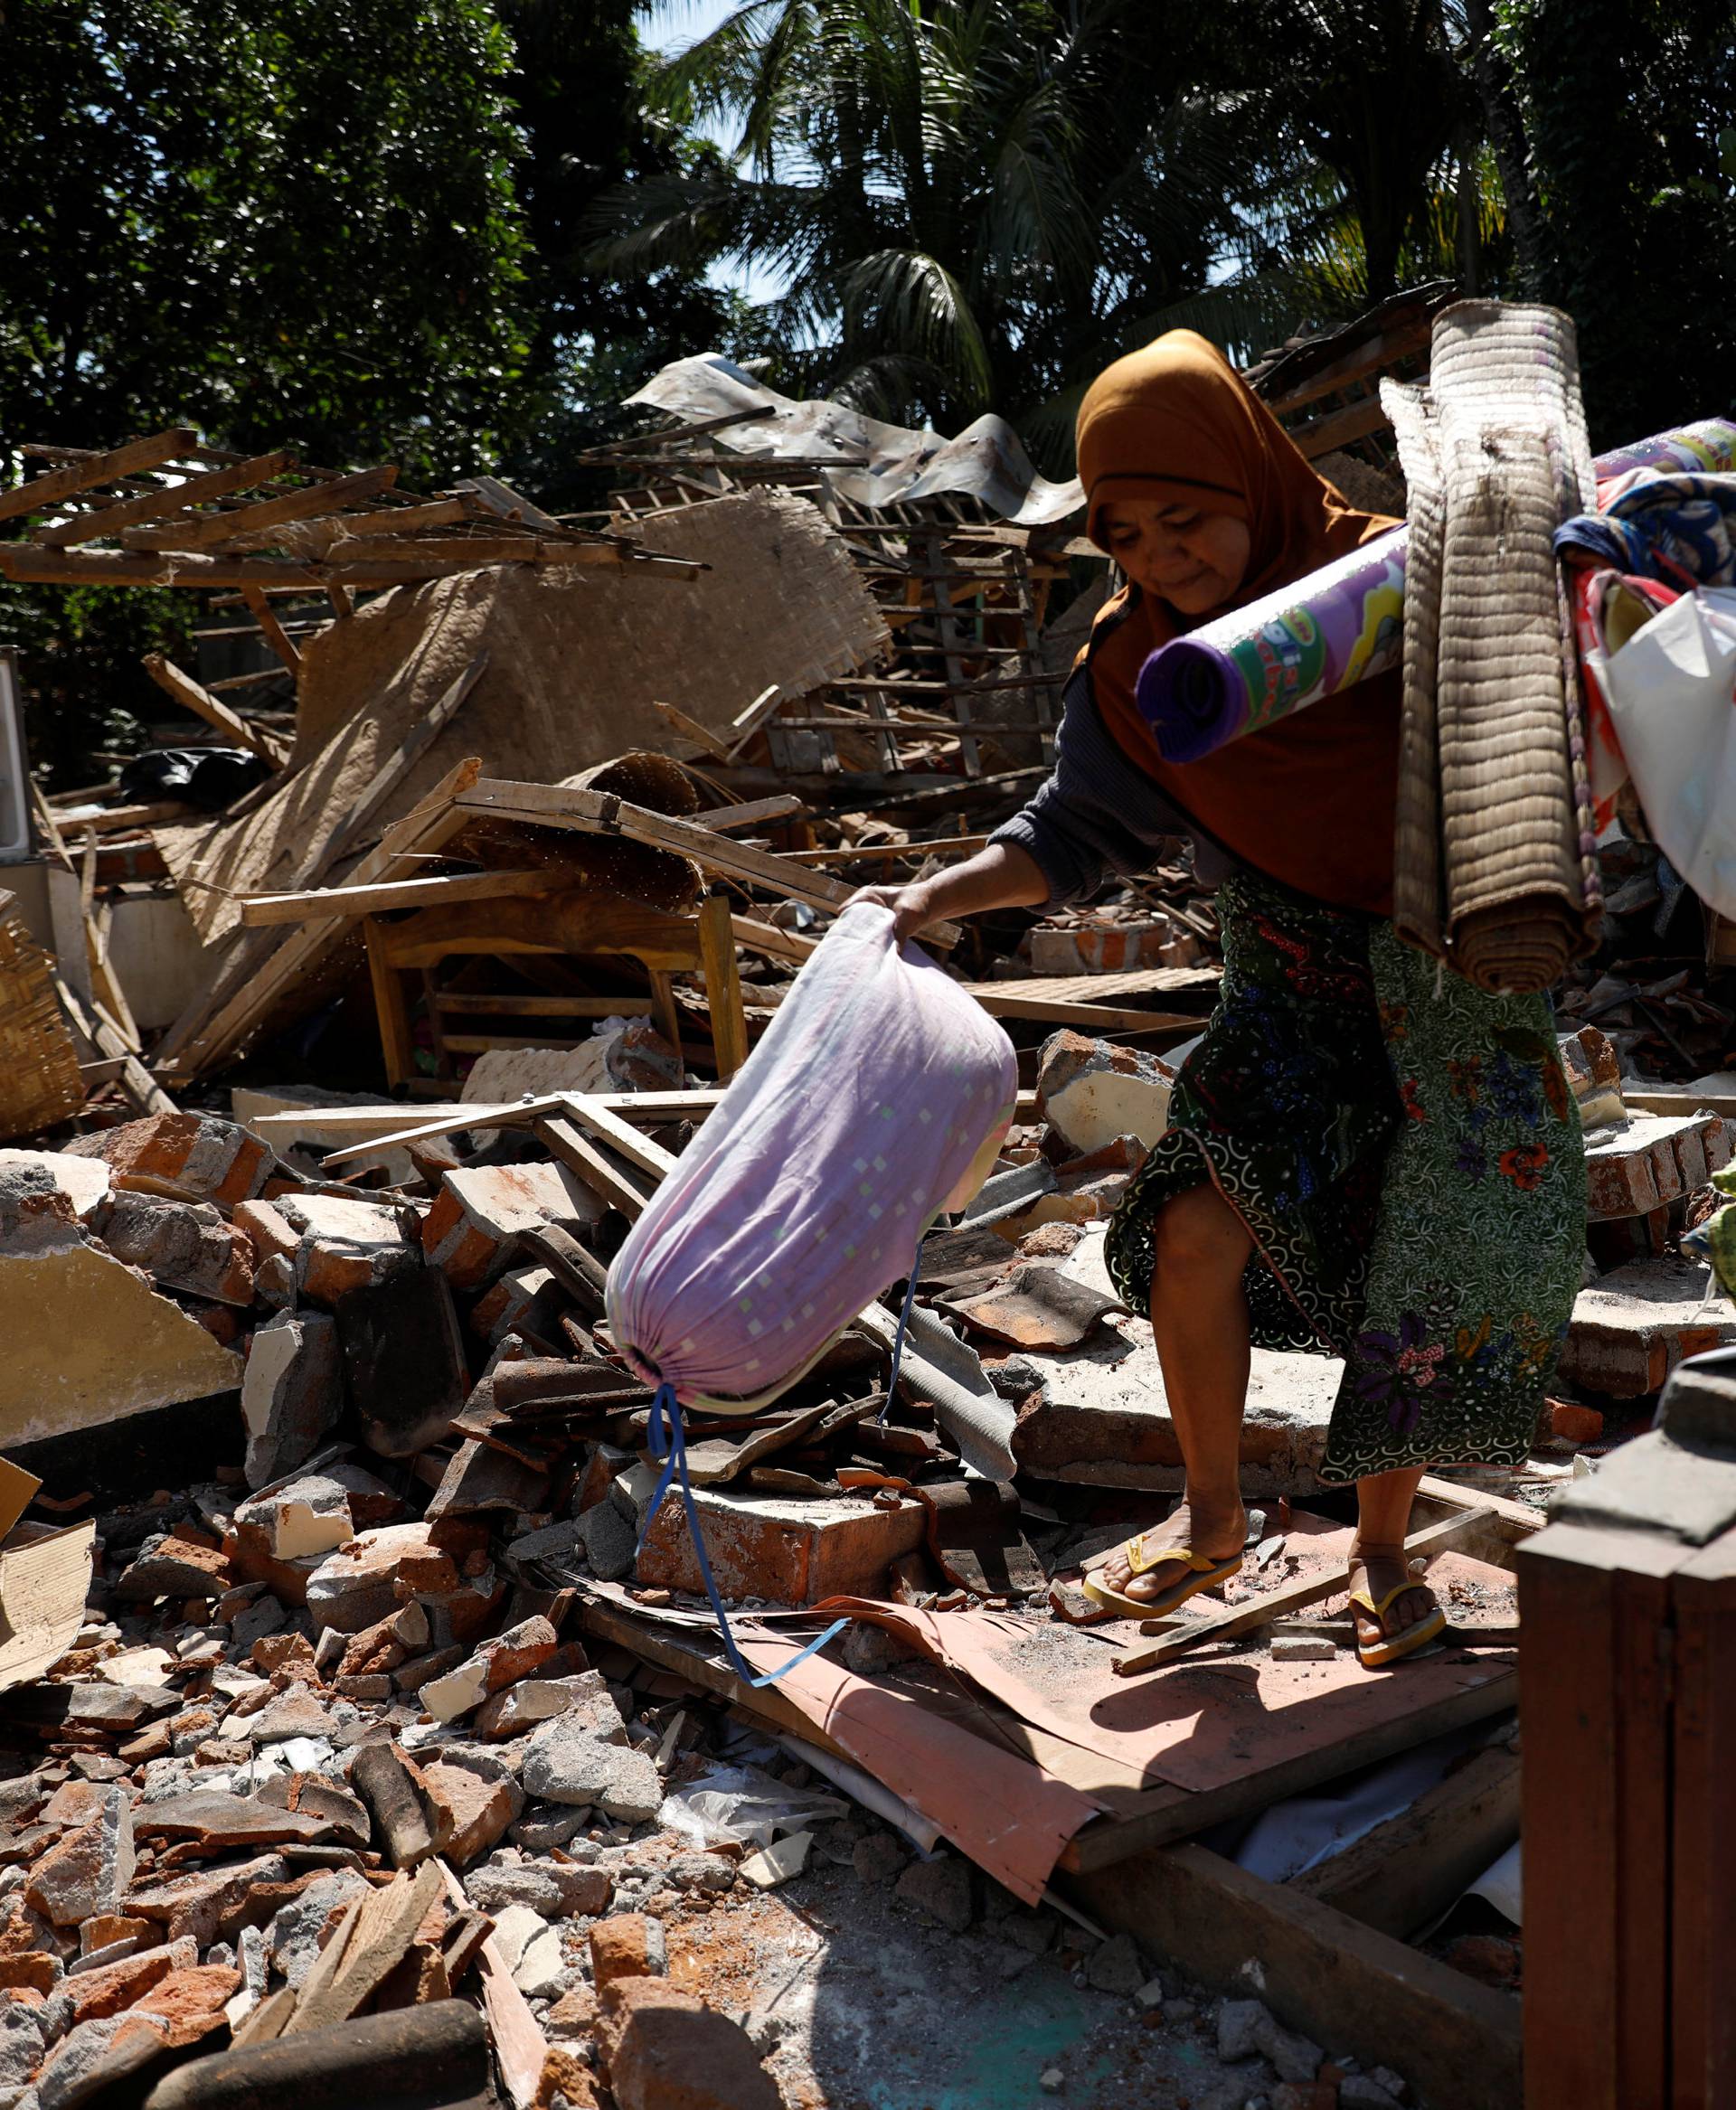 A woman carries valuable goods from the ruins of her house at Kayangan district after earthquake hit on Sunday in North Lombok